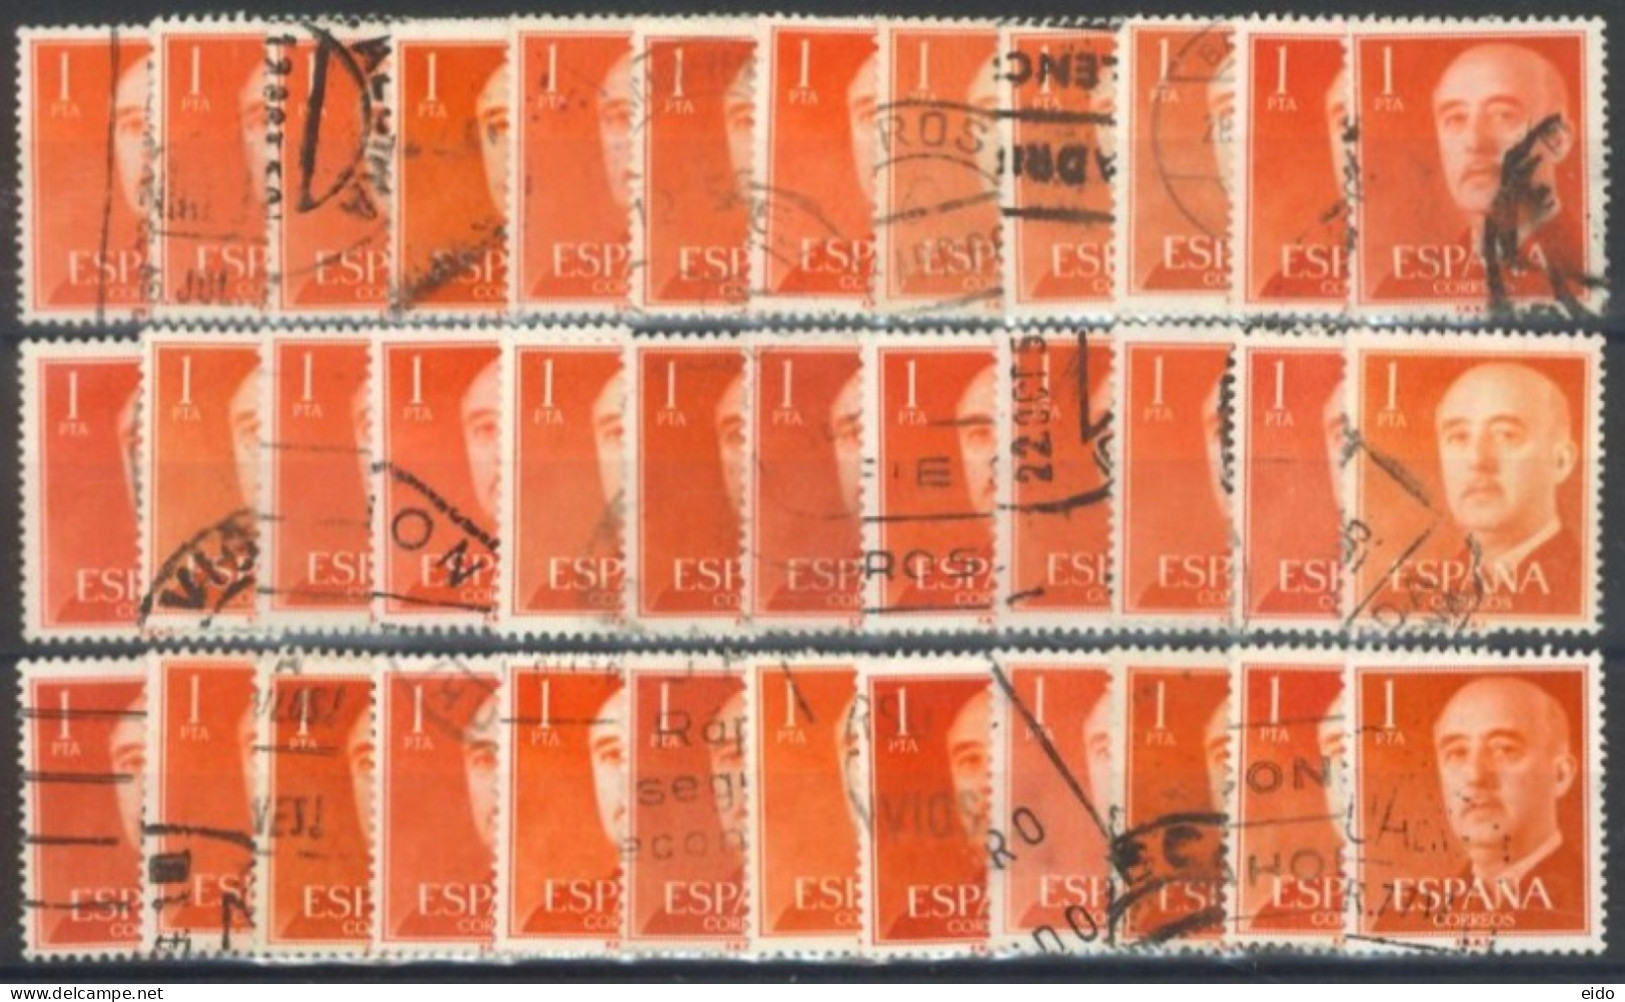 SPAIN- 1954/56, GENERAL FRANCO STAMP QTY : 36 REDUSED SPECIAL PRICE # 825, USED. - Oblitérés